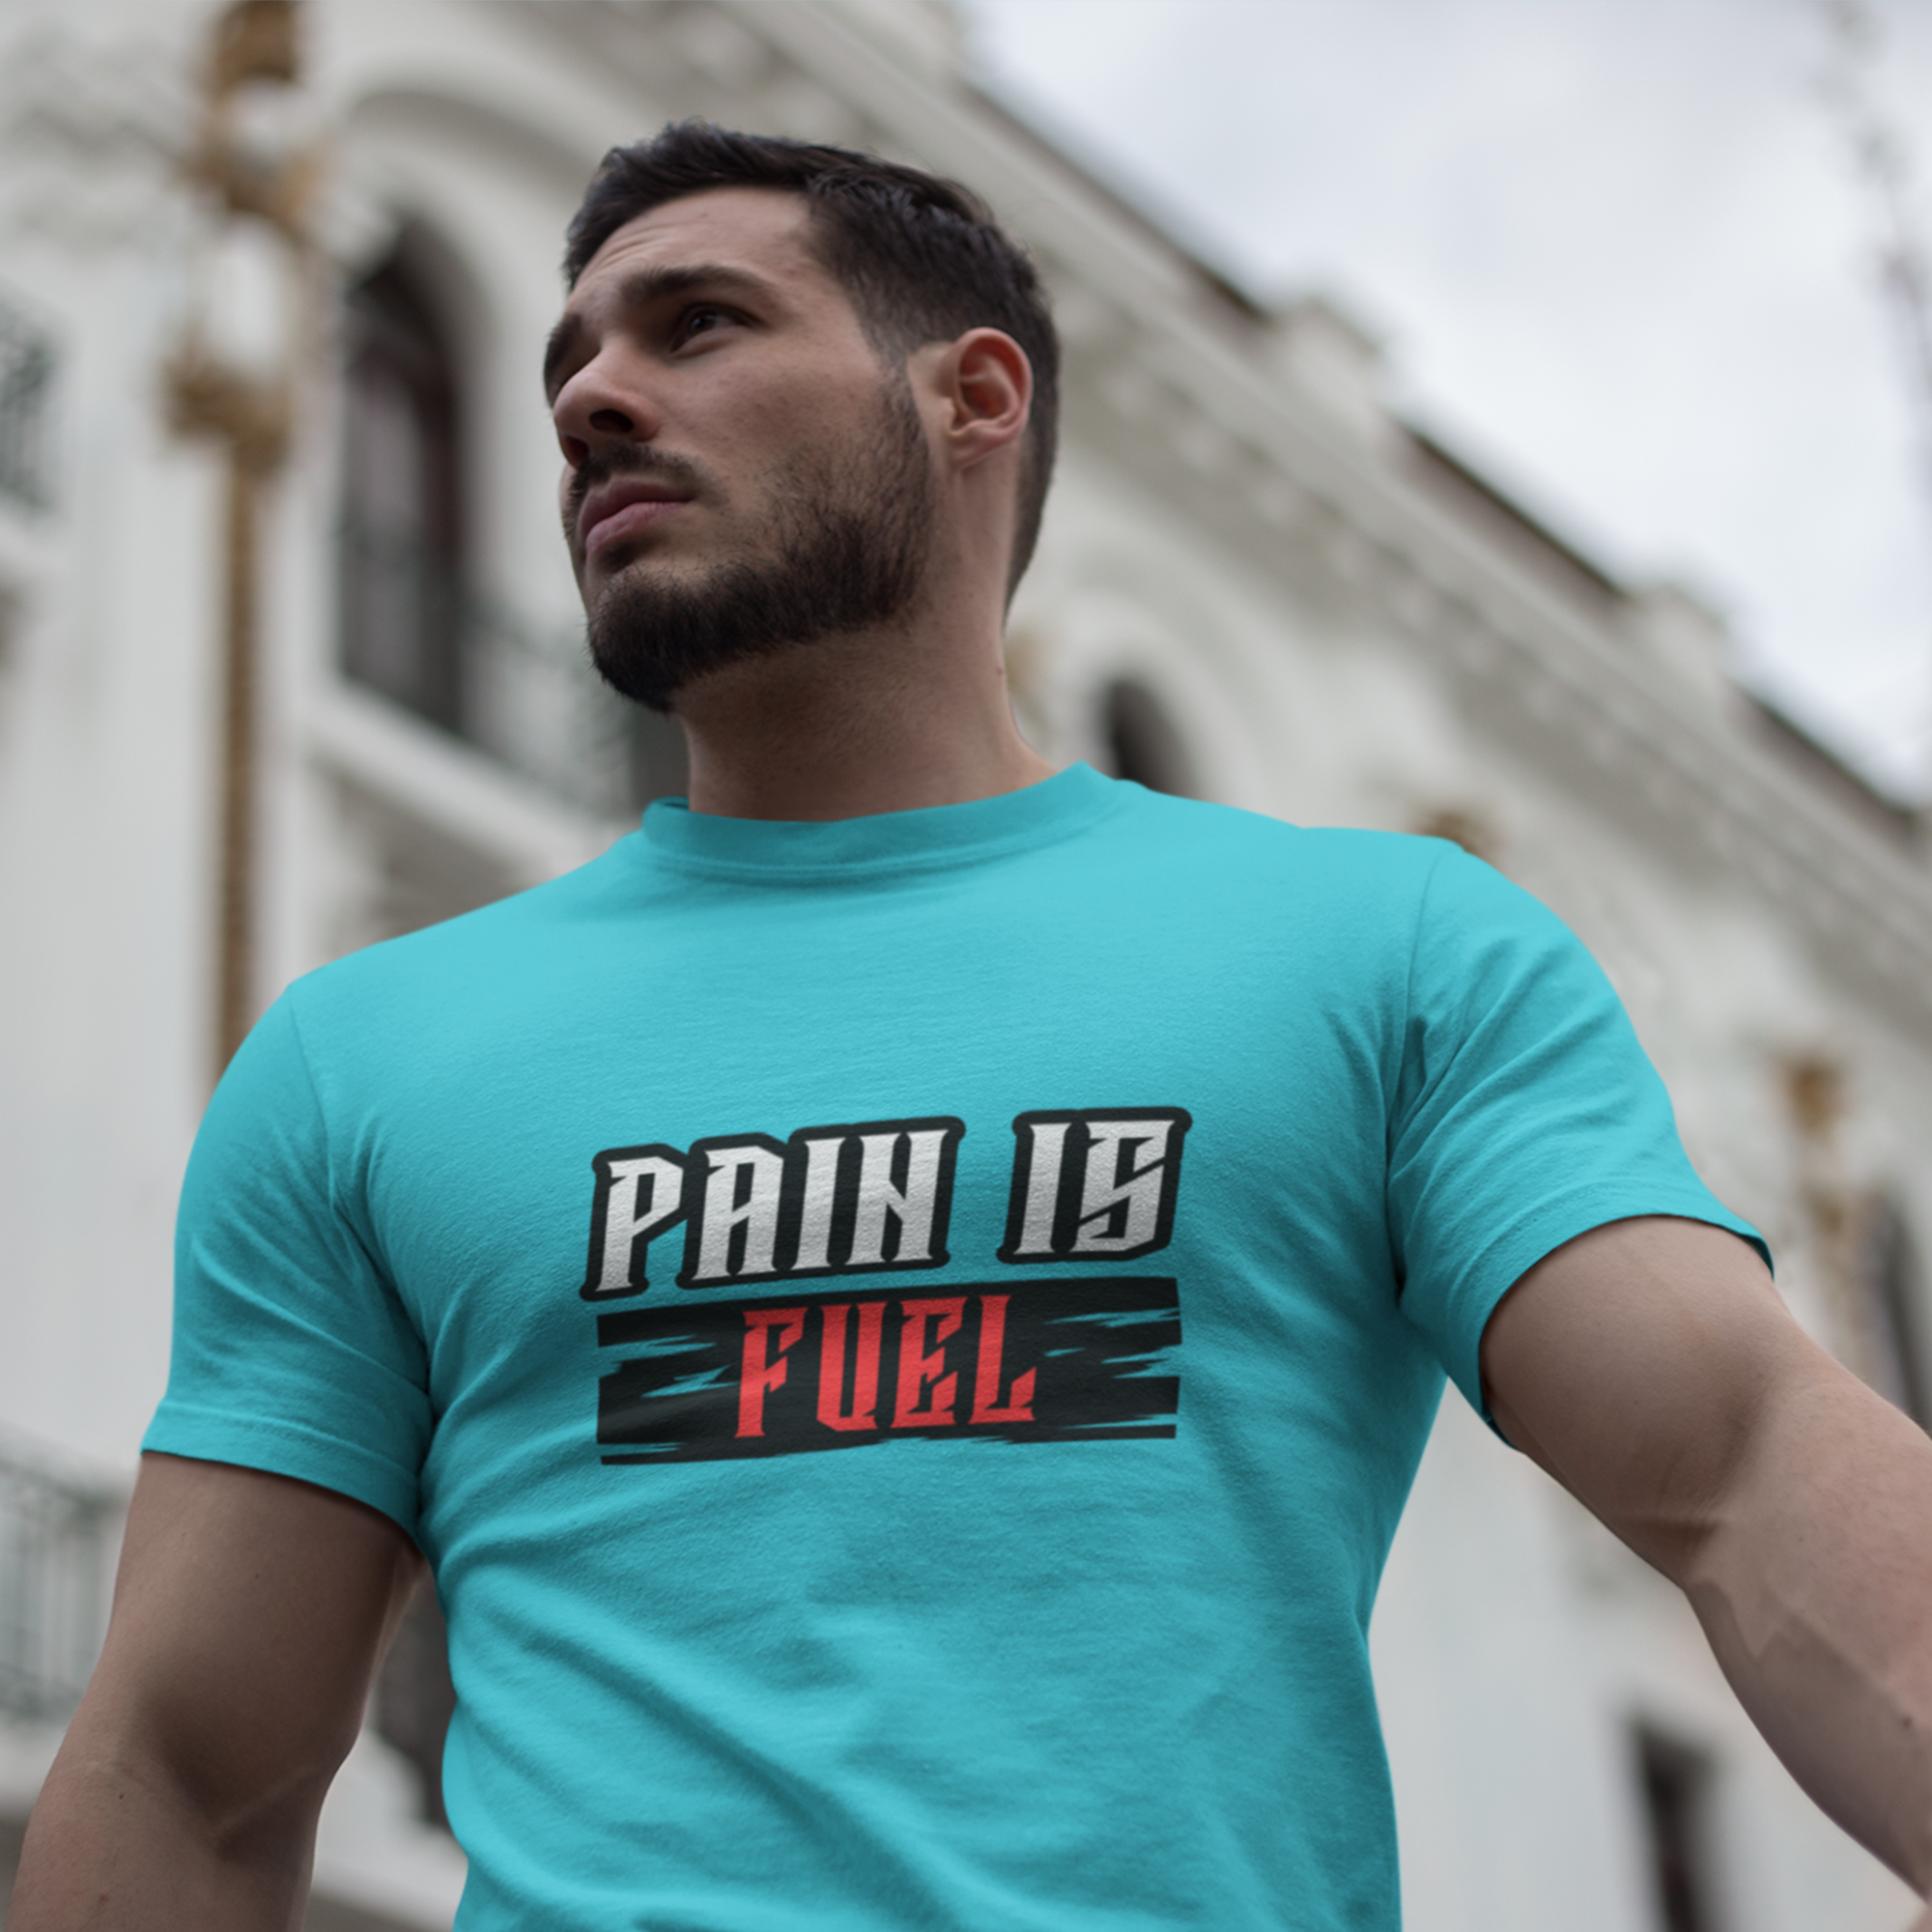 Download Pain Is Fuel Active Fitness Gym Motivational T Shirt For Men Fitlectics